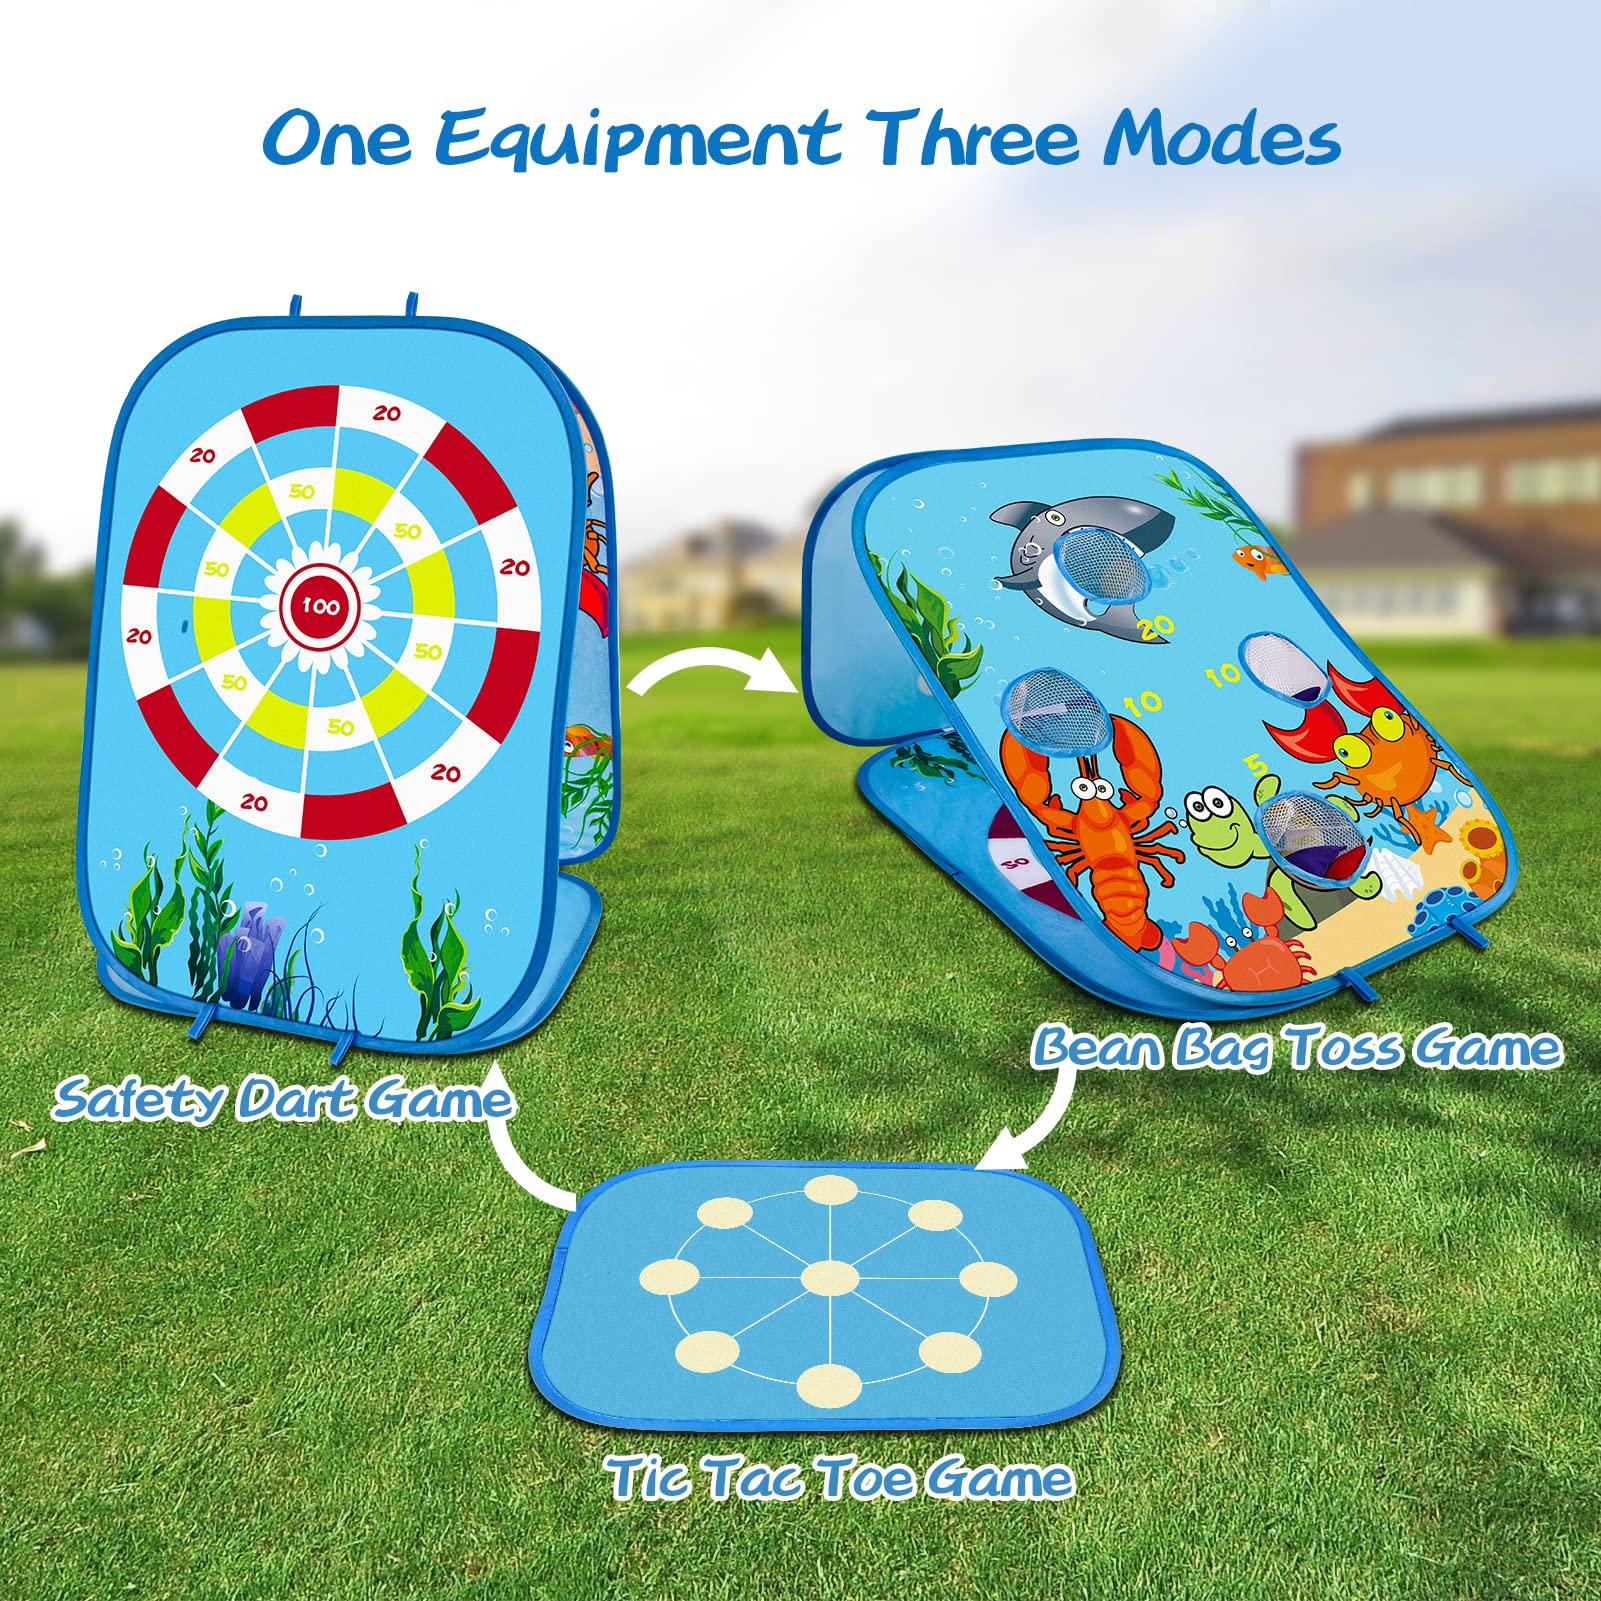 Bean Bag Toss Games for Kids,RISEMART Toddlers Bean Bag Toss Indoor Outdoor Toys Gifts for 2 3 4 5 Year Old Boys Girls Dinosaur Cornhole Game for Backyard Beach Yard Birthday Party…